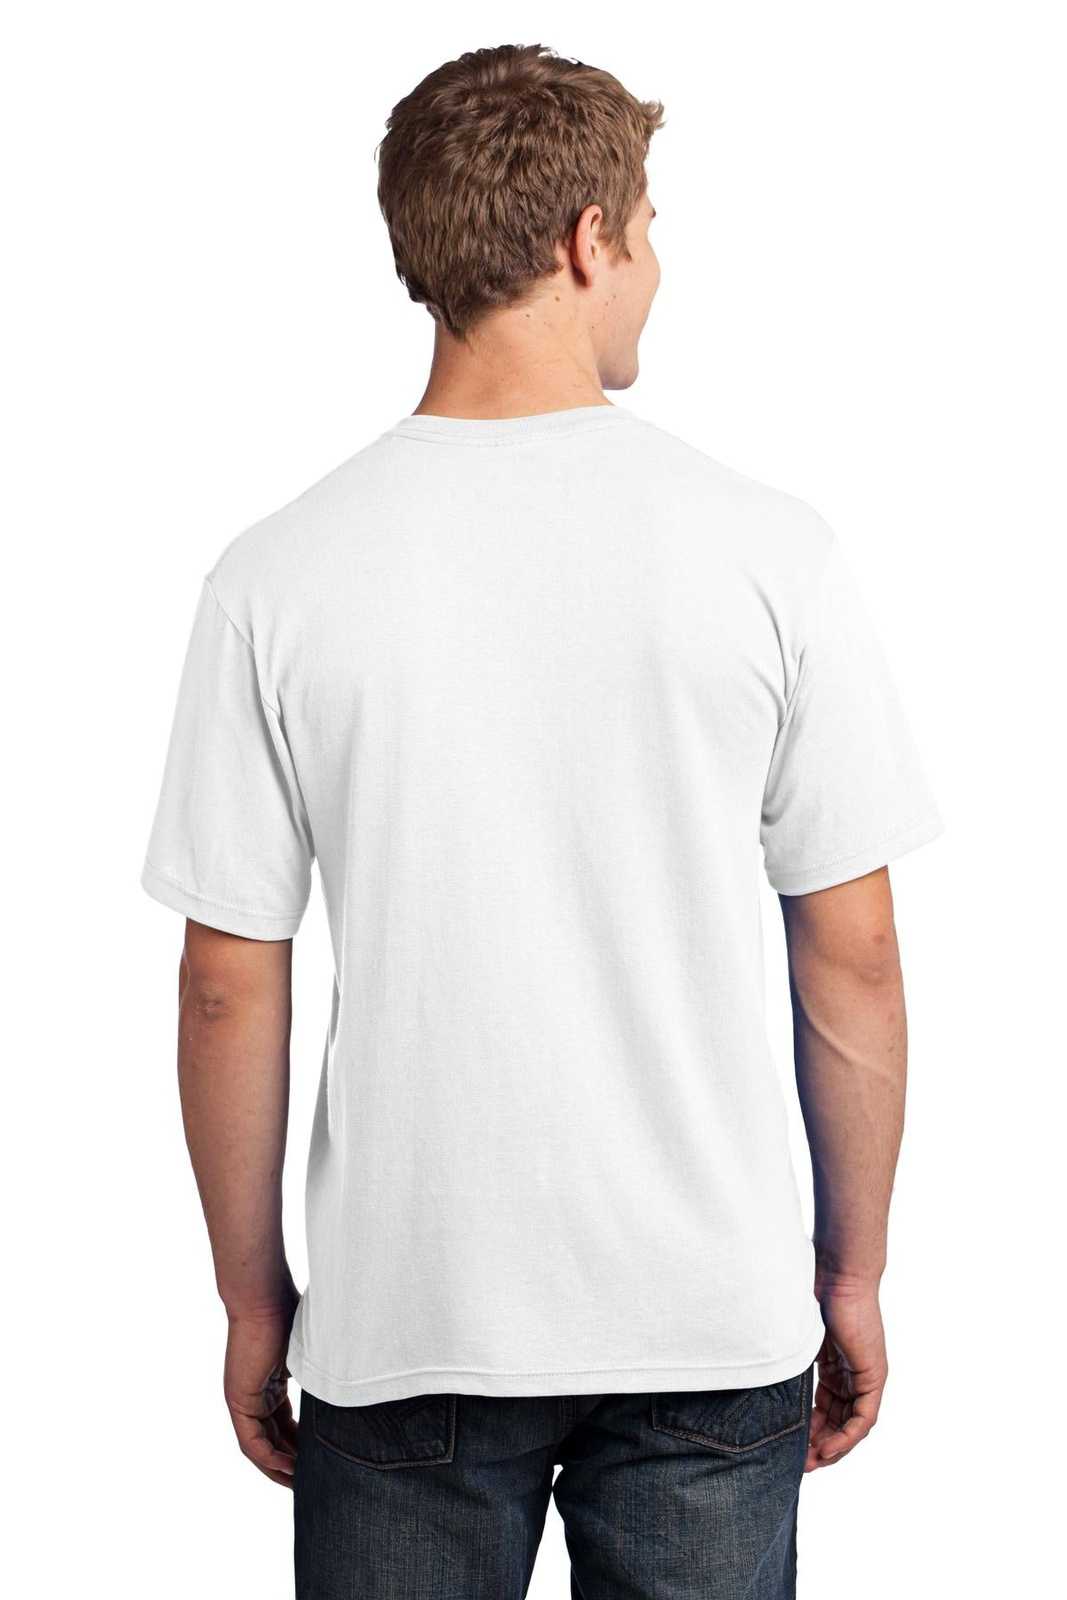 Port &amp; Company USA100P All-American Pocket Tee - White - HIT a Double - 2